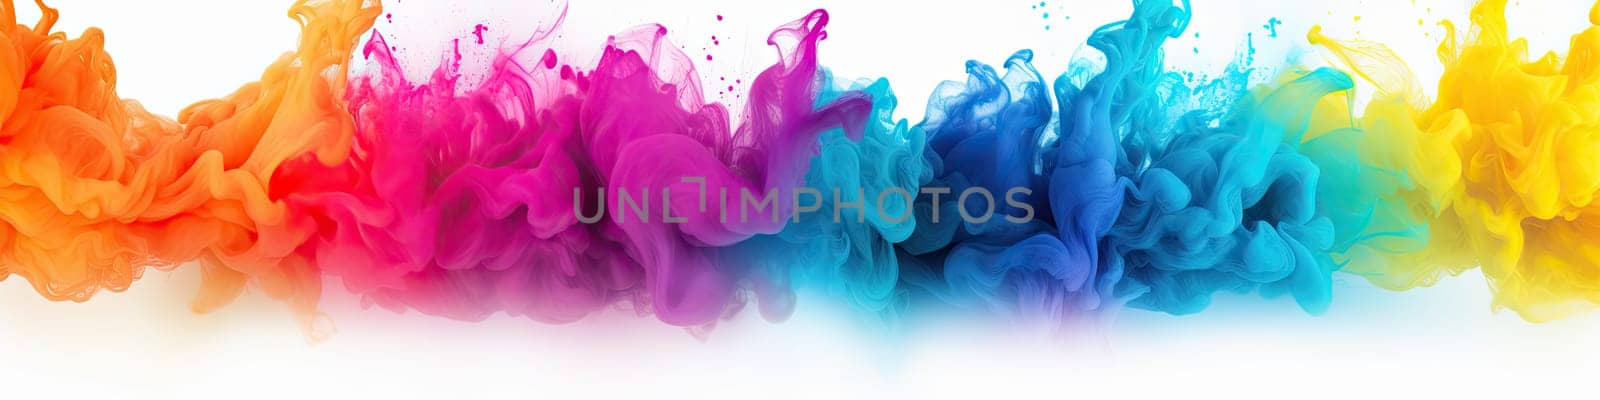 Colorful rainbow holi paint color powder explosion isolated on the white background by Kadula